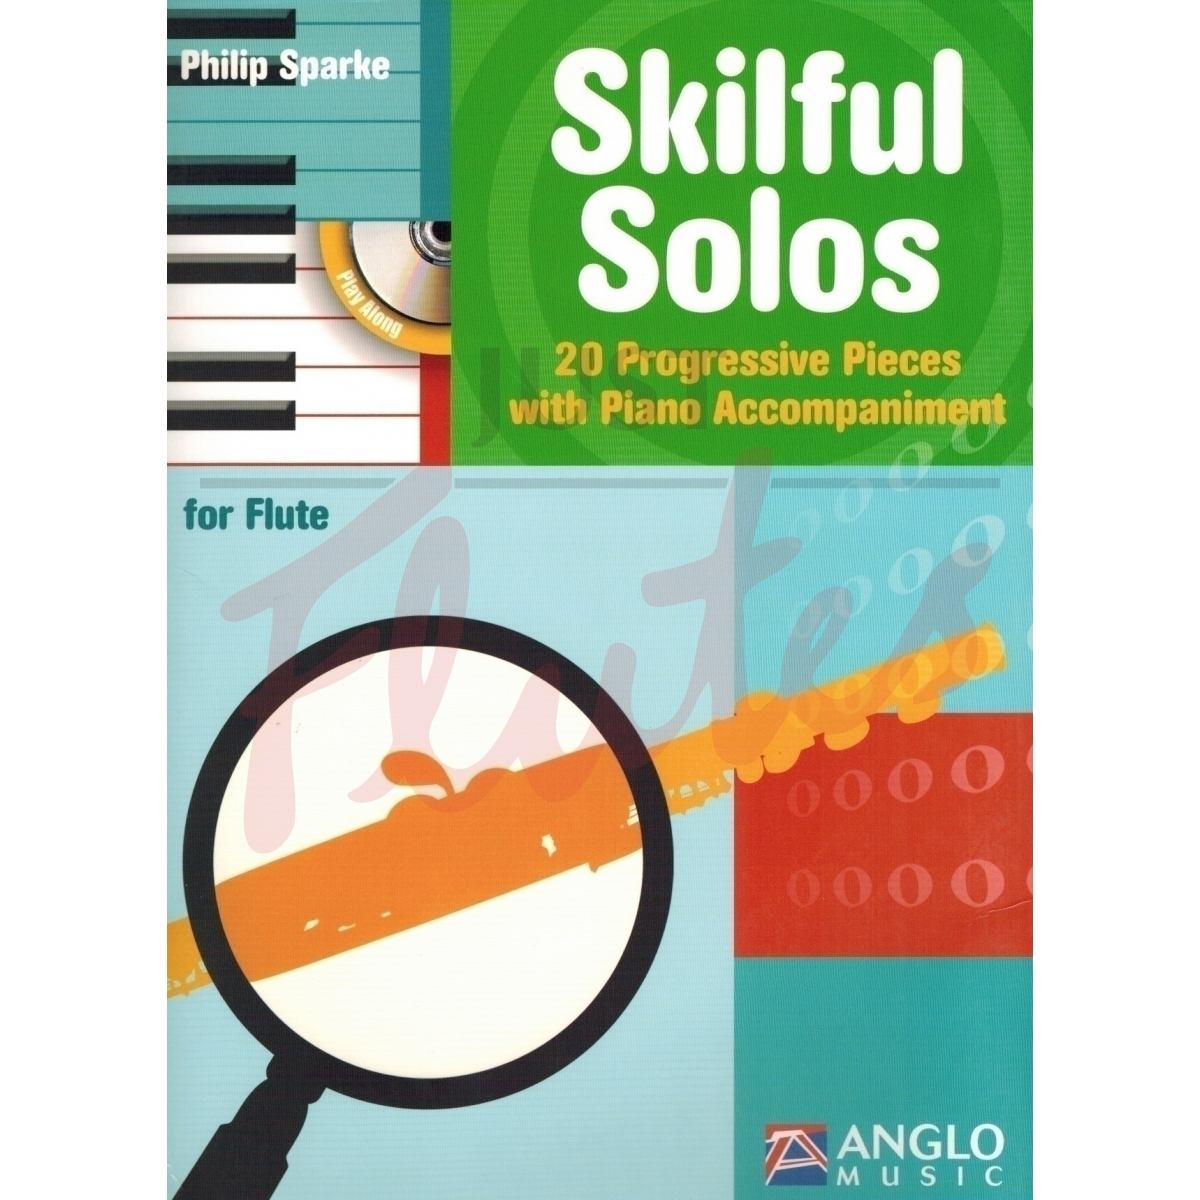 Skilful Solos for Flute and Piano